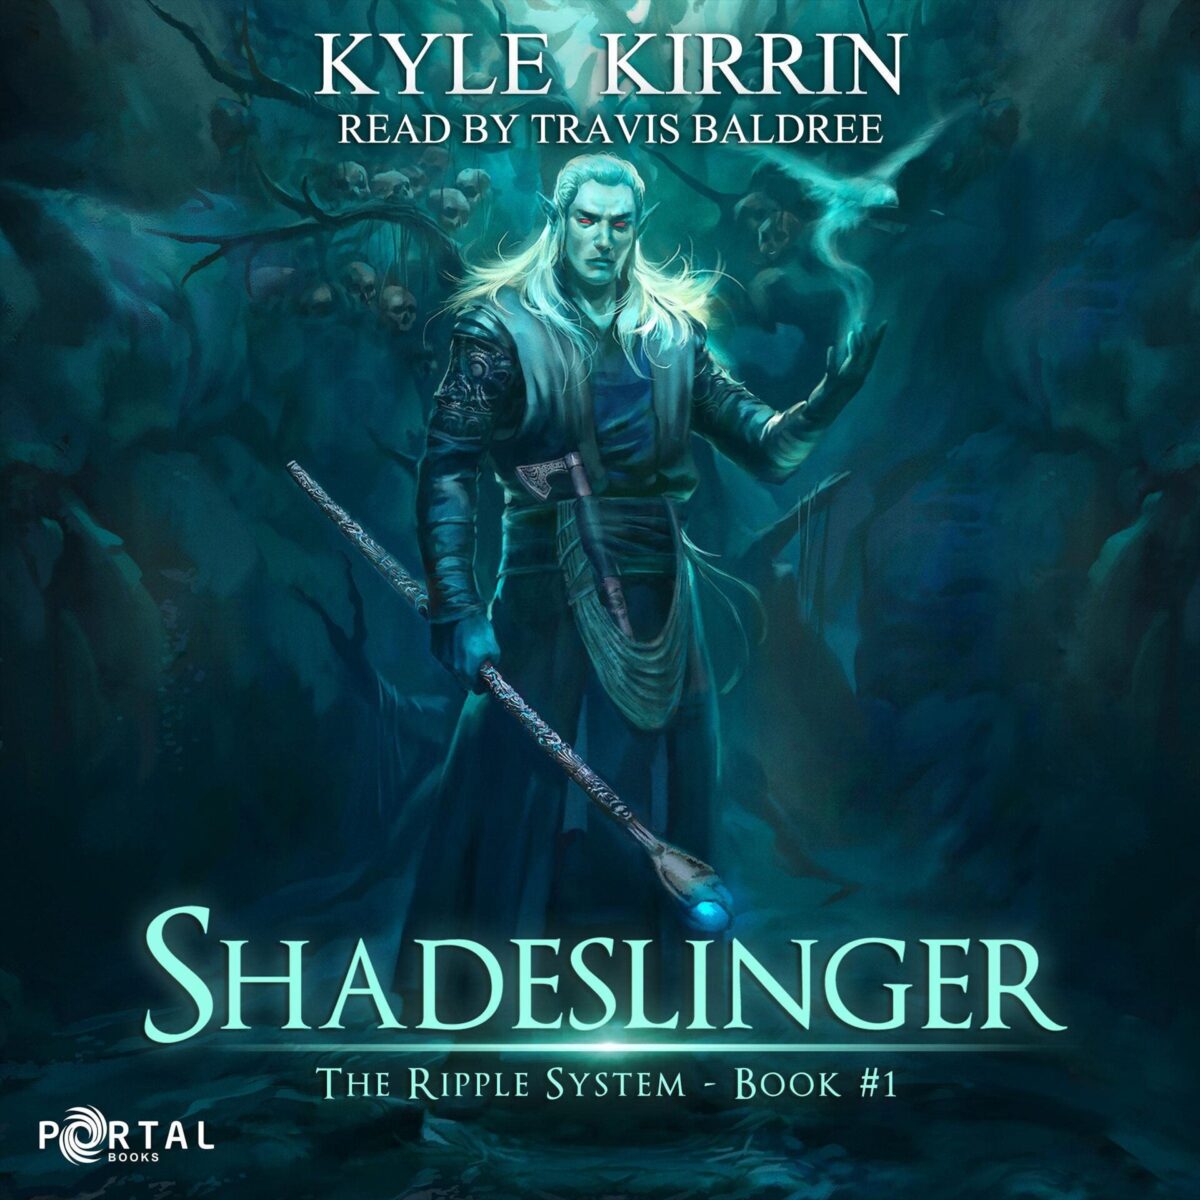 [1] Shadeslinger꞉ The Ripple System, Book 1 (a Fantasy Litrpg Series)